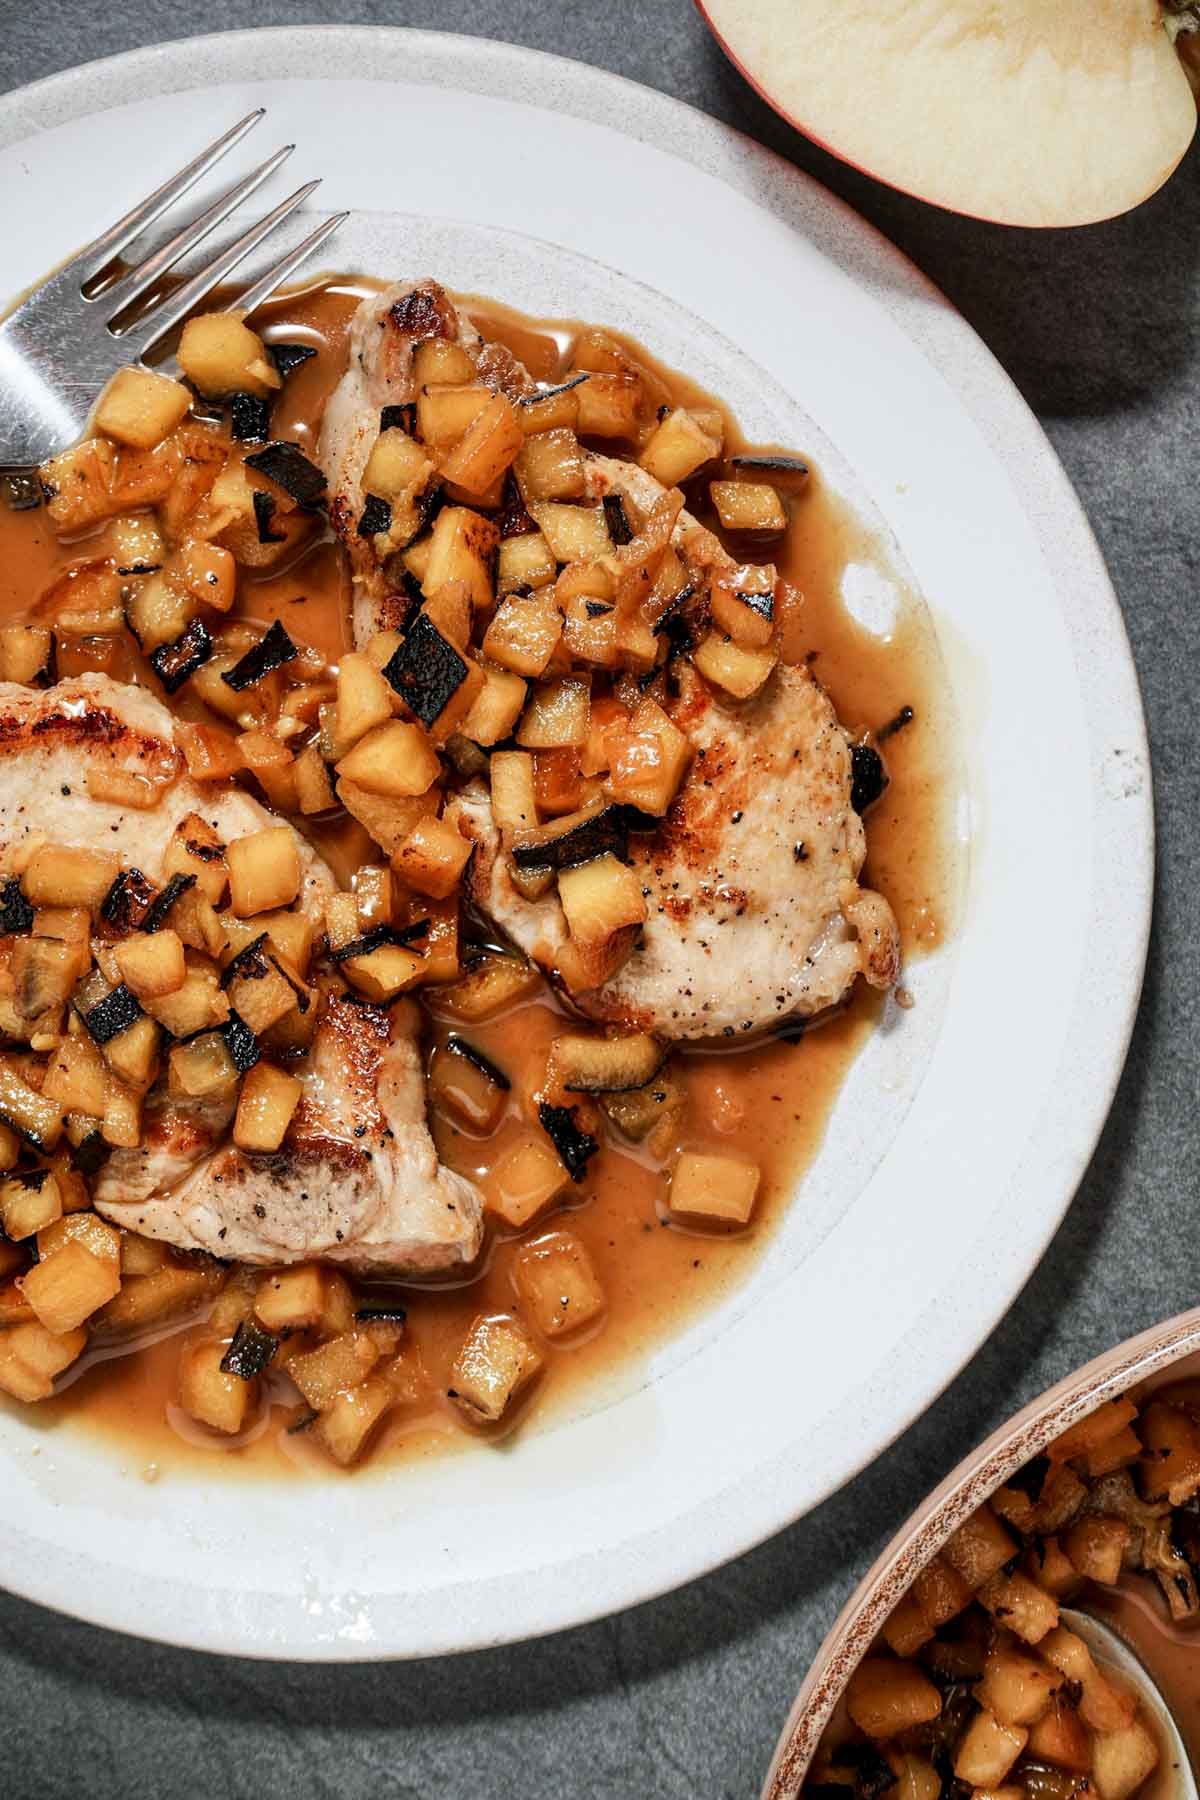 sauteed apple pieces in an orange colored sauce over top of 2 pork chops